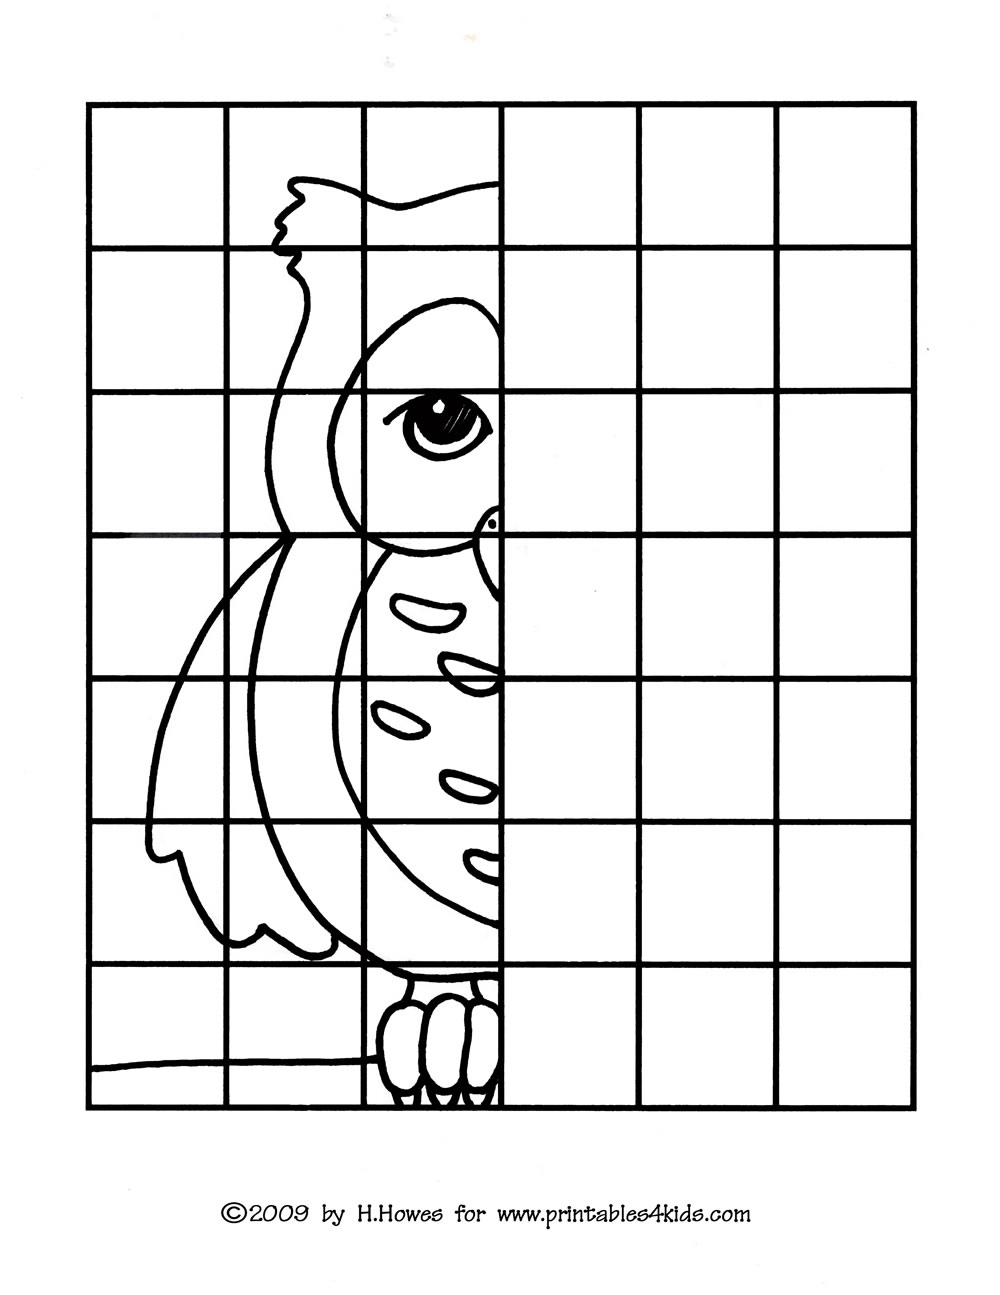 Owl Complete the Picture Drawing Printables for Kids free word